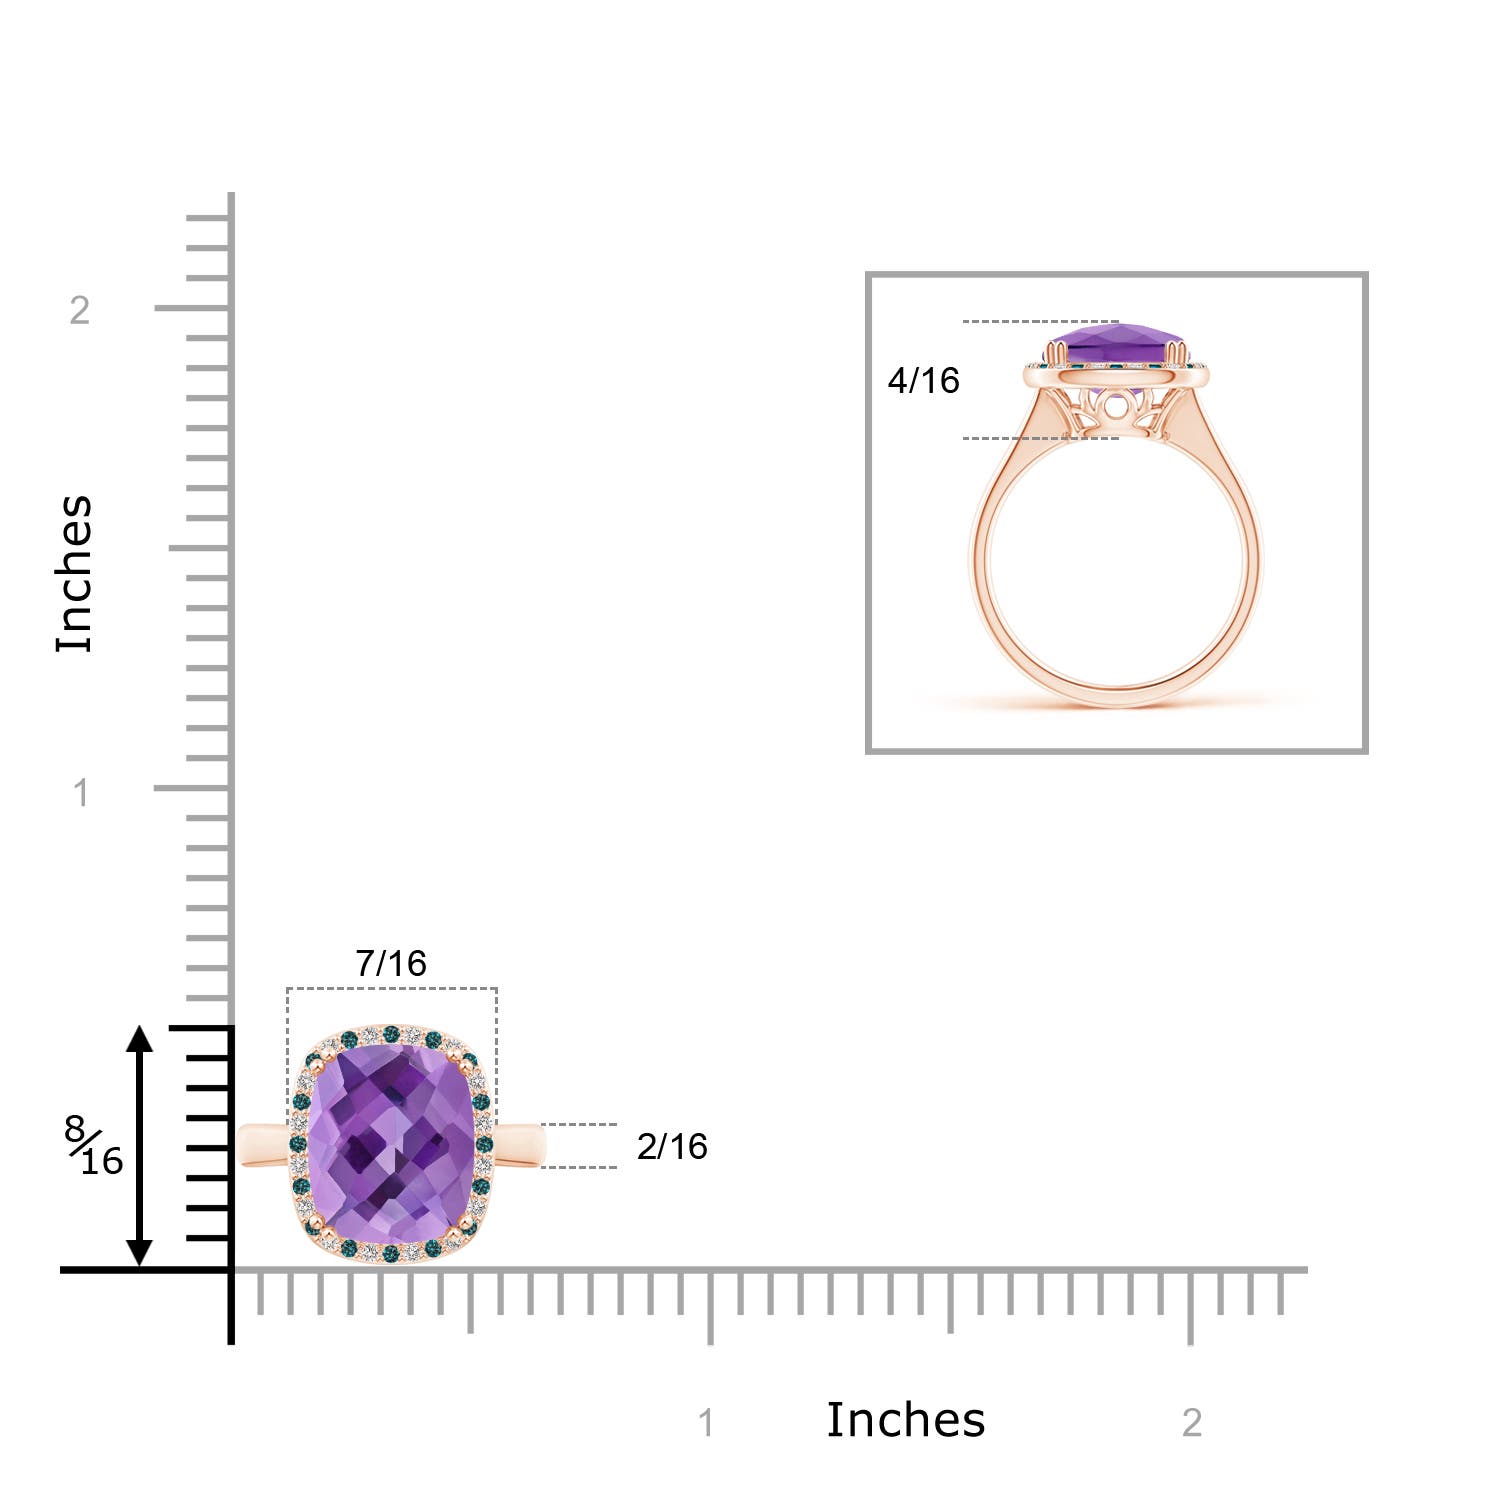 AA - Amethyst / 3.14 CT / 14 KT Rose Gold